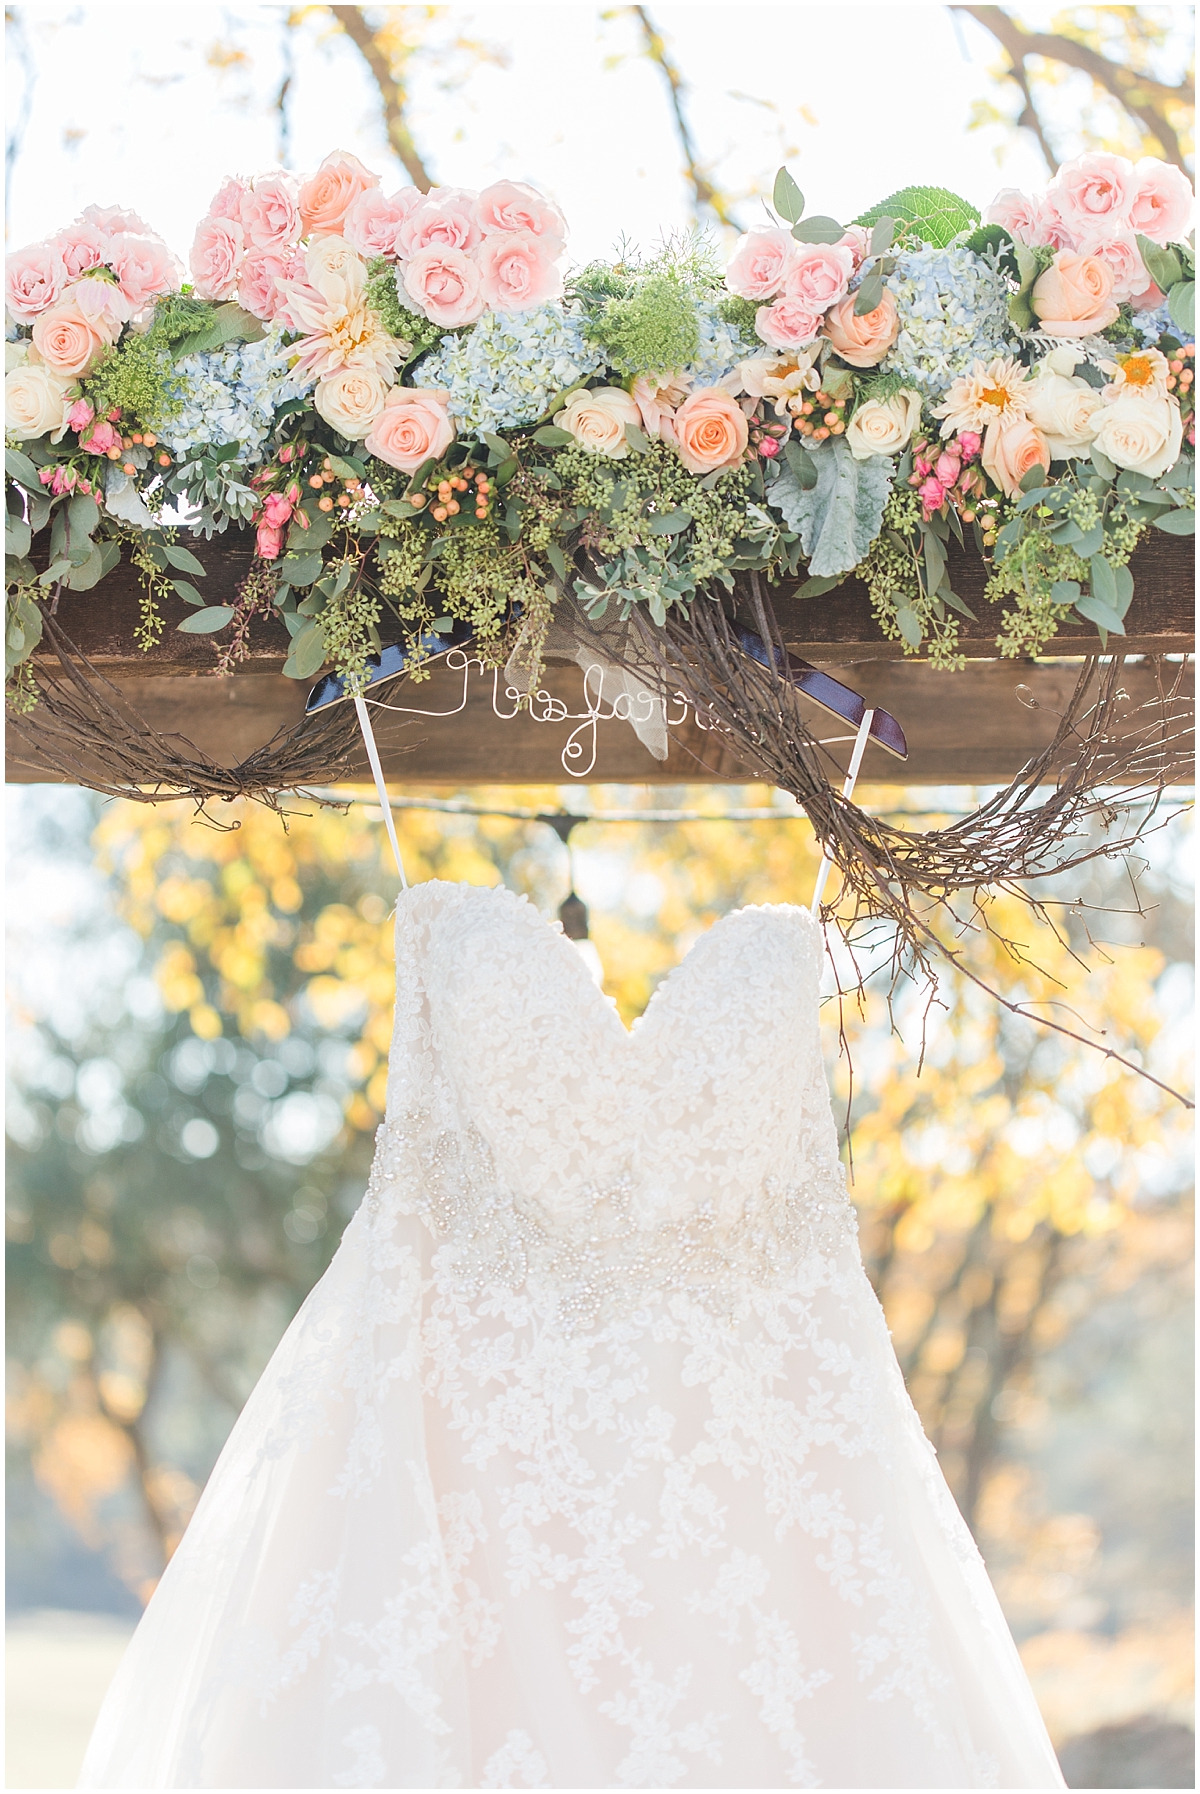 a-slate-blue-and-grey-winter-wedding-at-cw-hill-country-ranch-in-boerne-texas-by-allison-jeffers-wedding-photography_0014